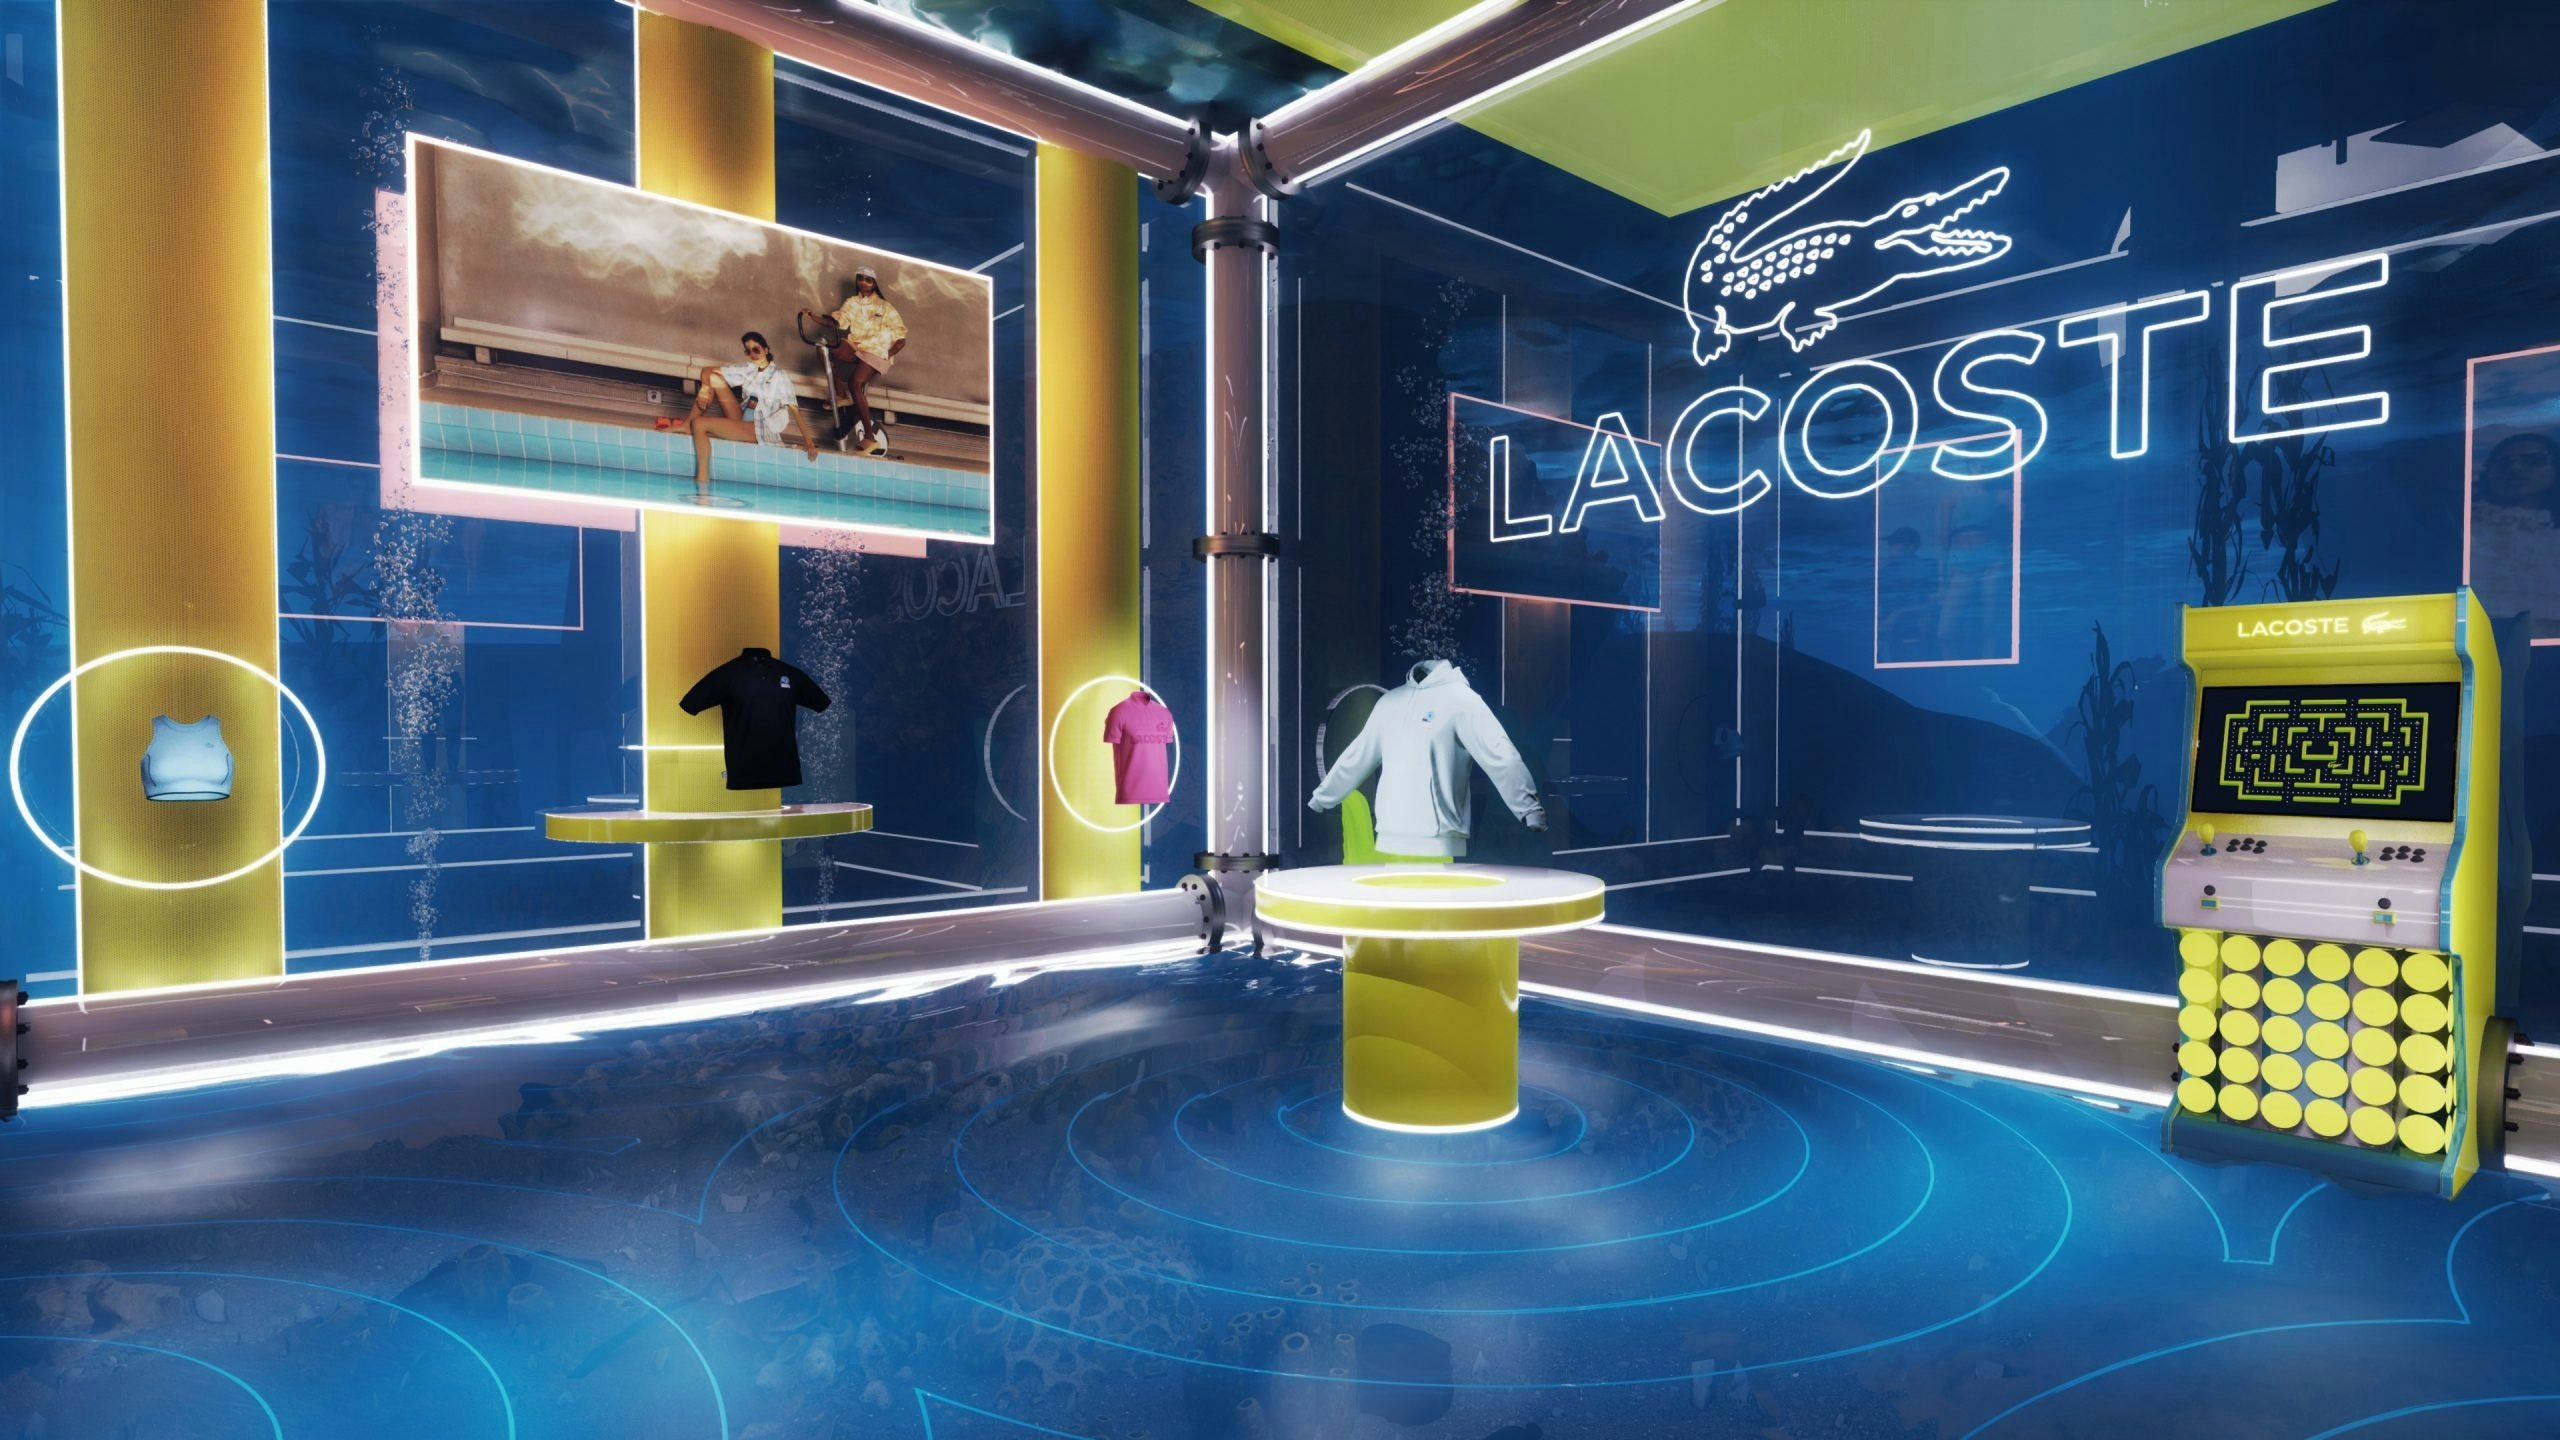 Web3 trends have come and gone over the past year. But can the new retail wave of virtual stores outlive expectations and permanently revolutionize e-commerce? Photo: Lacoste